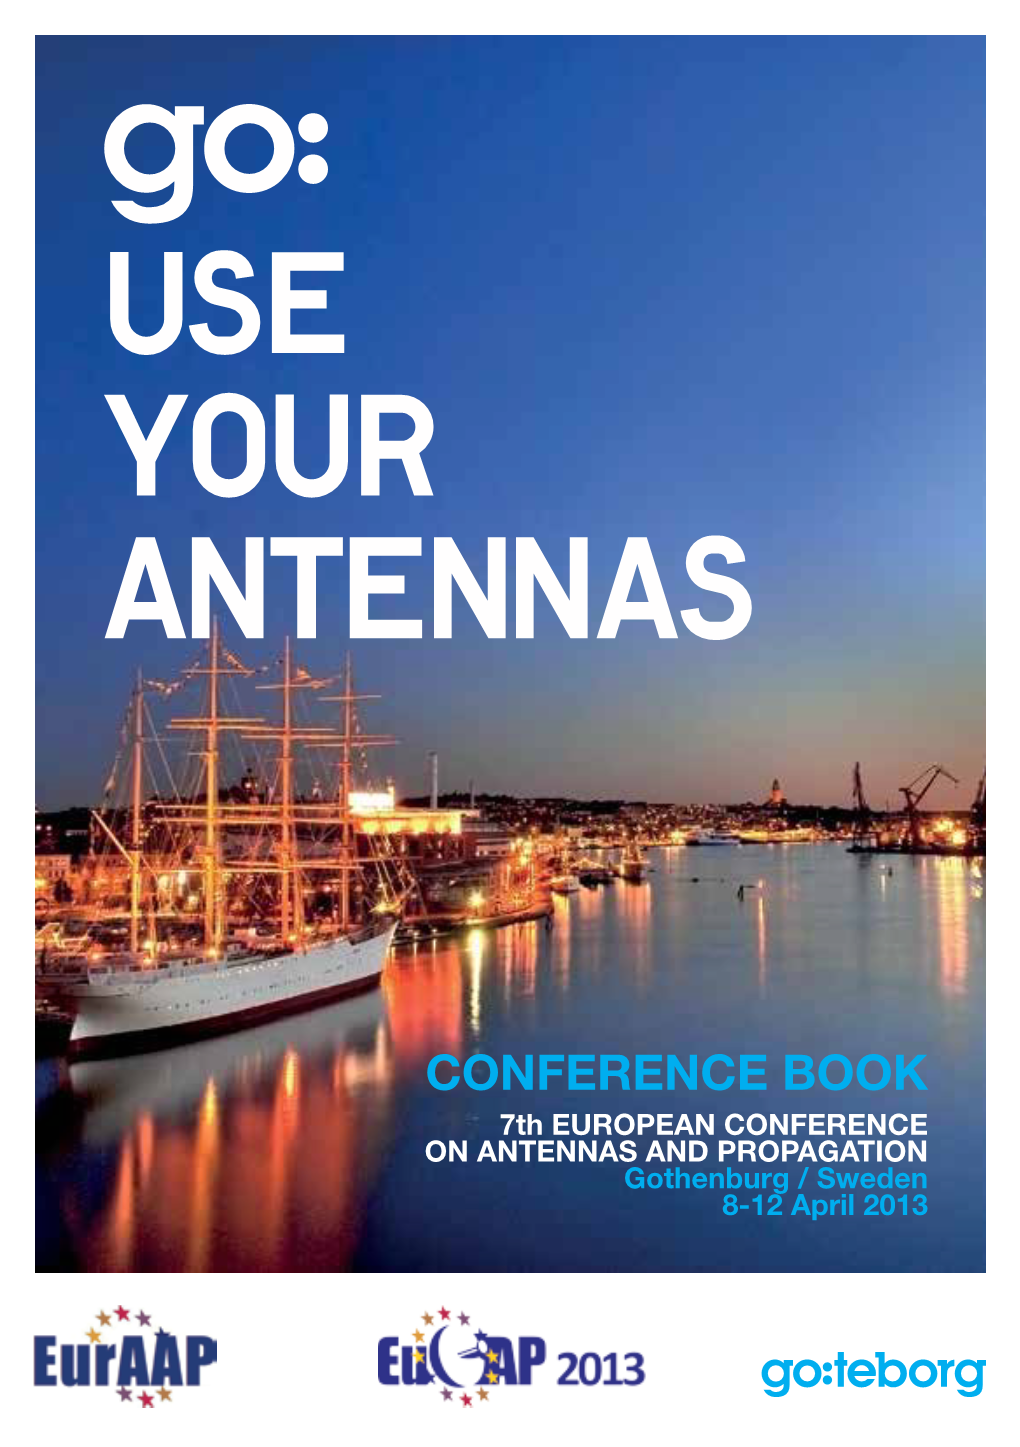 CONFERENCE BOOK 7Th EUROPEAN CONFERENCE on ANTENNAS and PROPAGATION Gothenburg / Sweden 8-12 April 2013 Components Don’T Exist in Electromagnetic Isolation